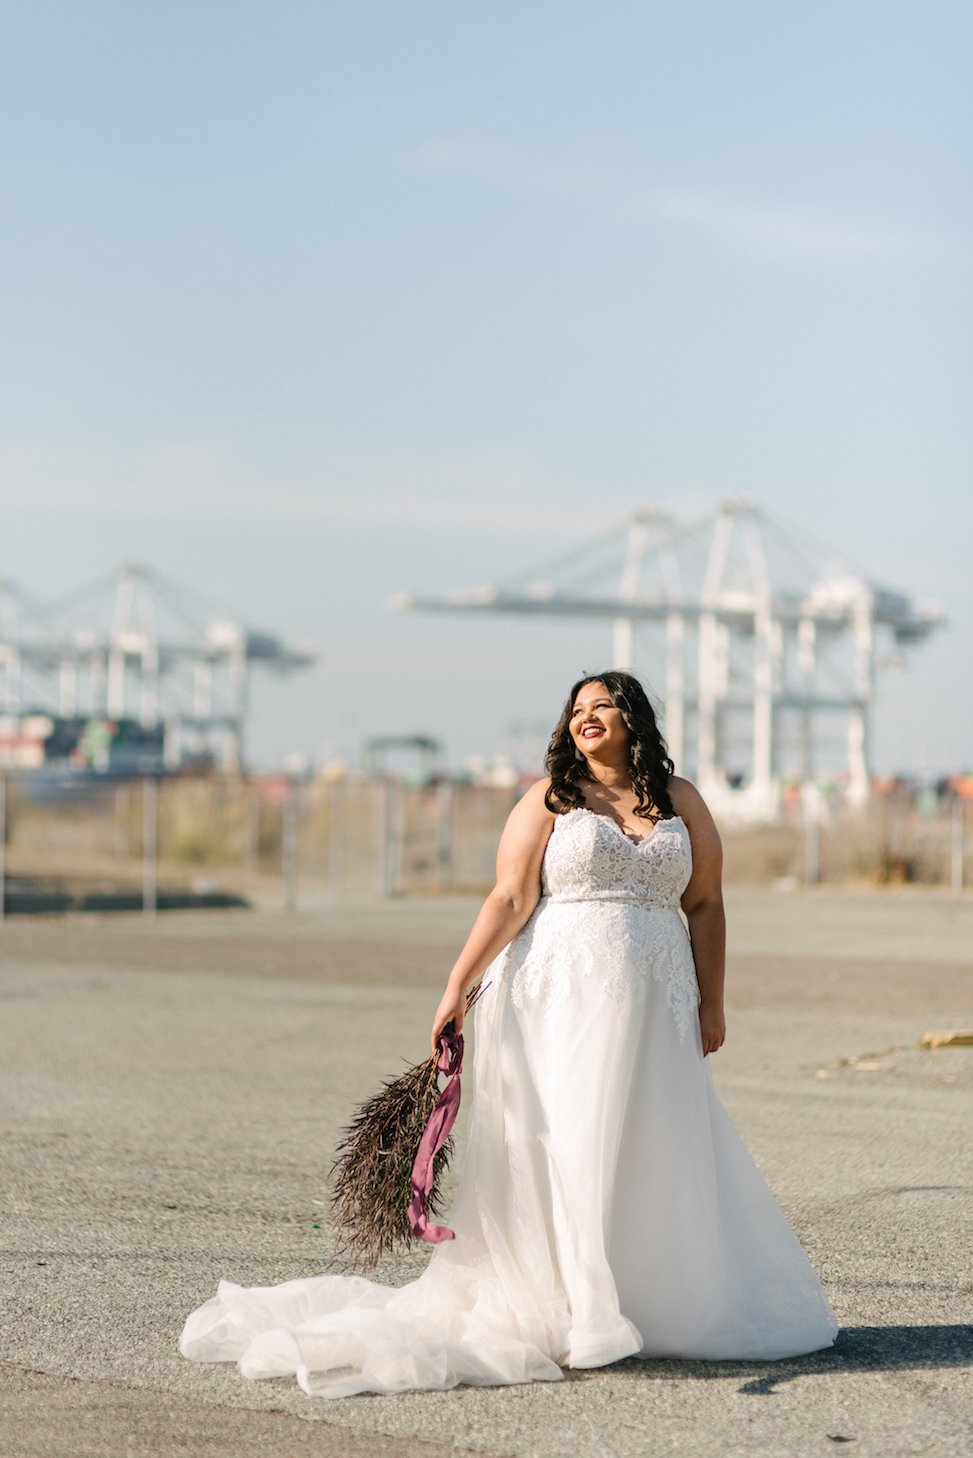 A woman stands in front of cranes smiling and wearing the Maggie Sottero dress style 'Vanessa.'